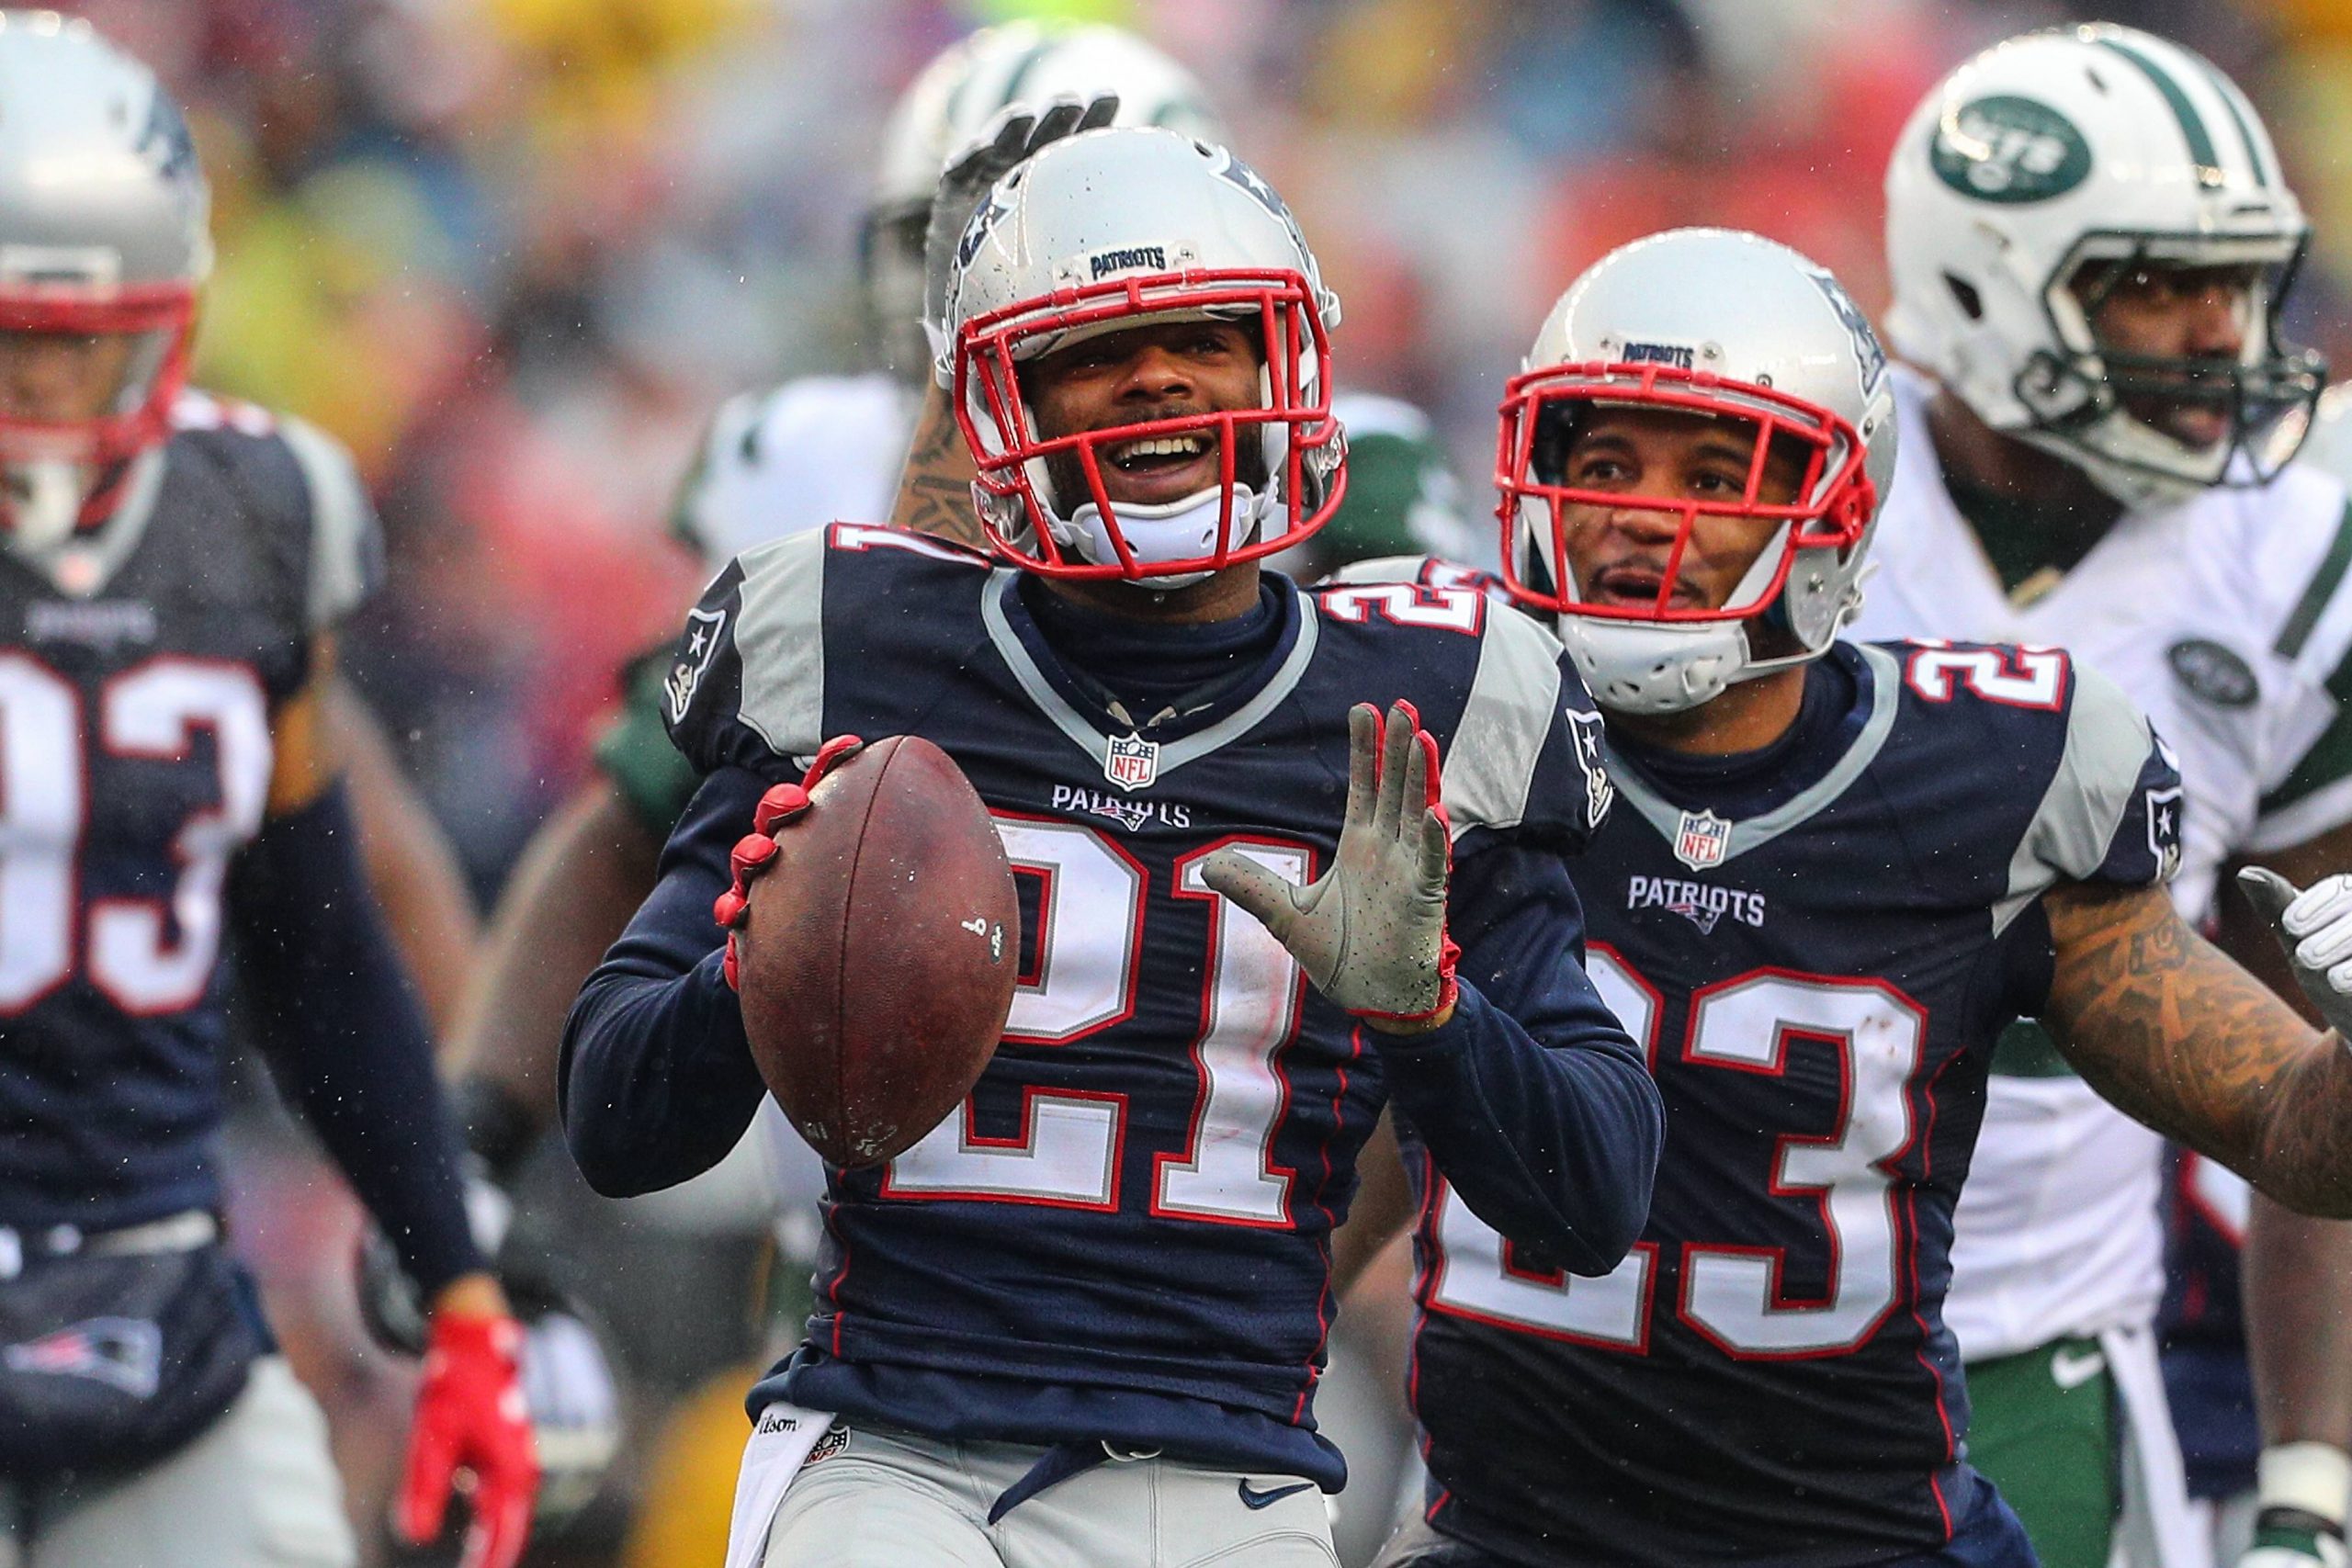 FOXBOROUGH, MA - DECEMBER 24: New England Patriots cornerback Malcolm Butler (21) recovers a fumble during the first quarter of the National Football League game between the New England Patriots and the New York Jets on December 24, 2016, at Gillette Stadium in Foxborough, MA. (Photo by Rich Graessle/Icon Sportswire) NFL American Football Herren USA DEC 24 Jets at Patriots PUBLICATIONxINxGERxSUIxAUTxHUNxRUSxSWExNORxONLY Icon1224160028 Foxborough Ma December 24 New England Patriots Cornerback Malcolm Butler 21 recover A Fumble during The First Quarter of The National Football League Game between The New England Patriots and The New York Jets ON December 24 2016 AT Gillette Stage in Foxborough Ma Photo by Rich Graessle Icon Sports Wire NFL American Football men USA DEC 24 Jets AT Patriots PUBLICATIONxINxGERxSUIxAUTxHUNxRUSxSWExNORxONLY Icon1224160028